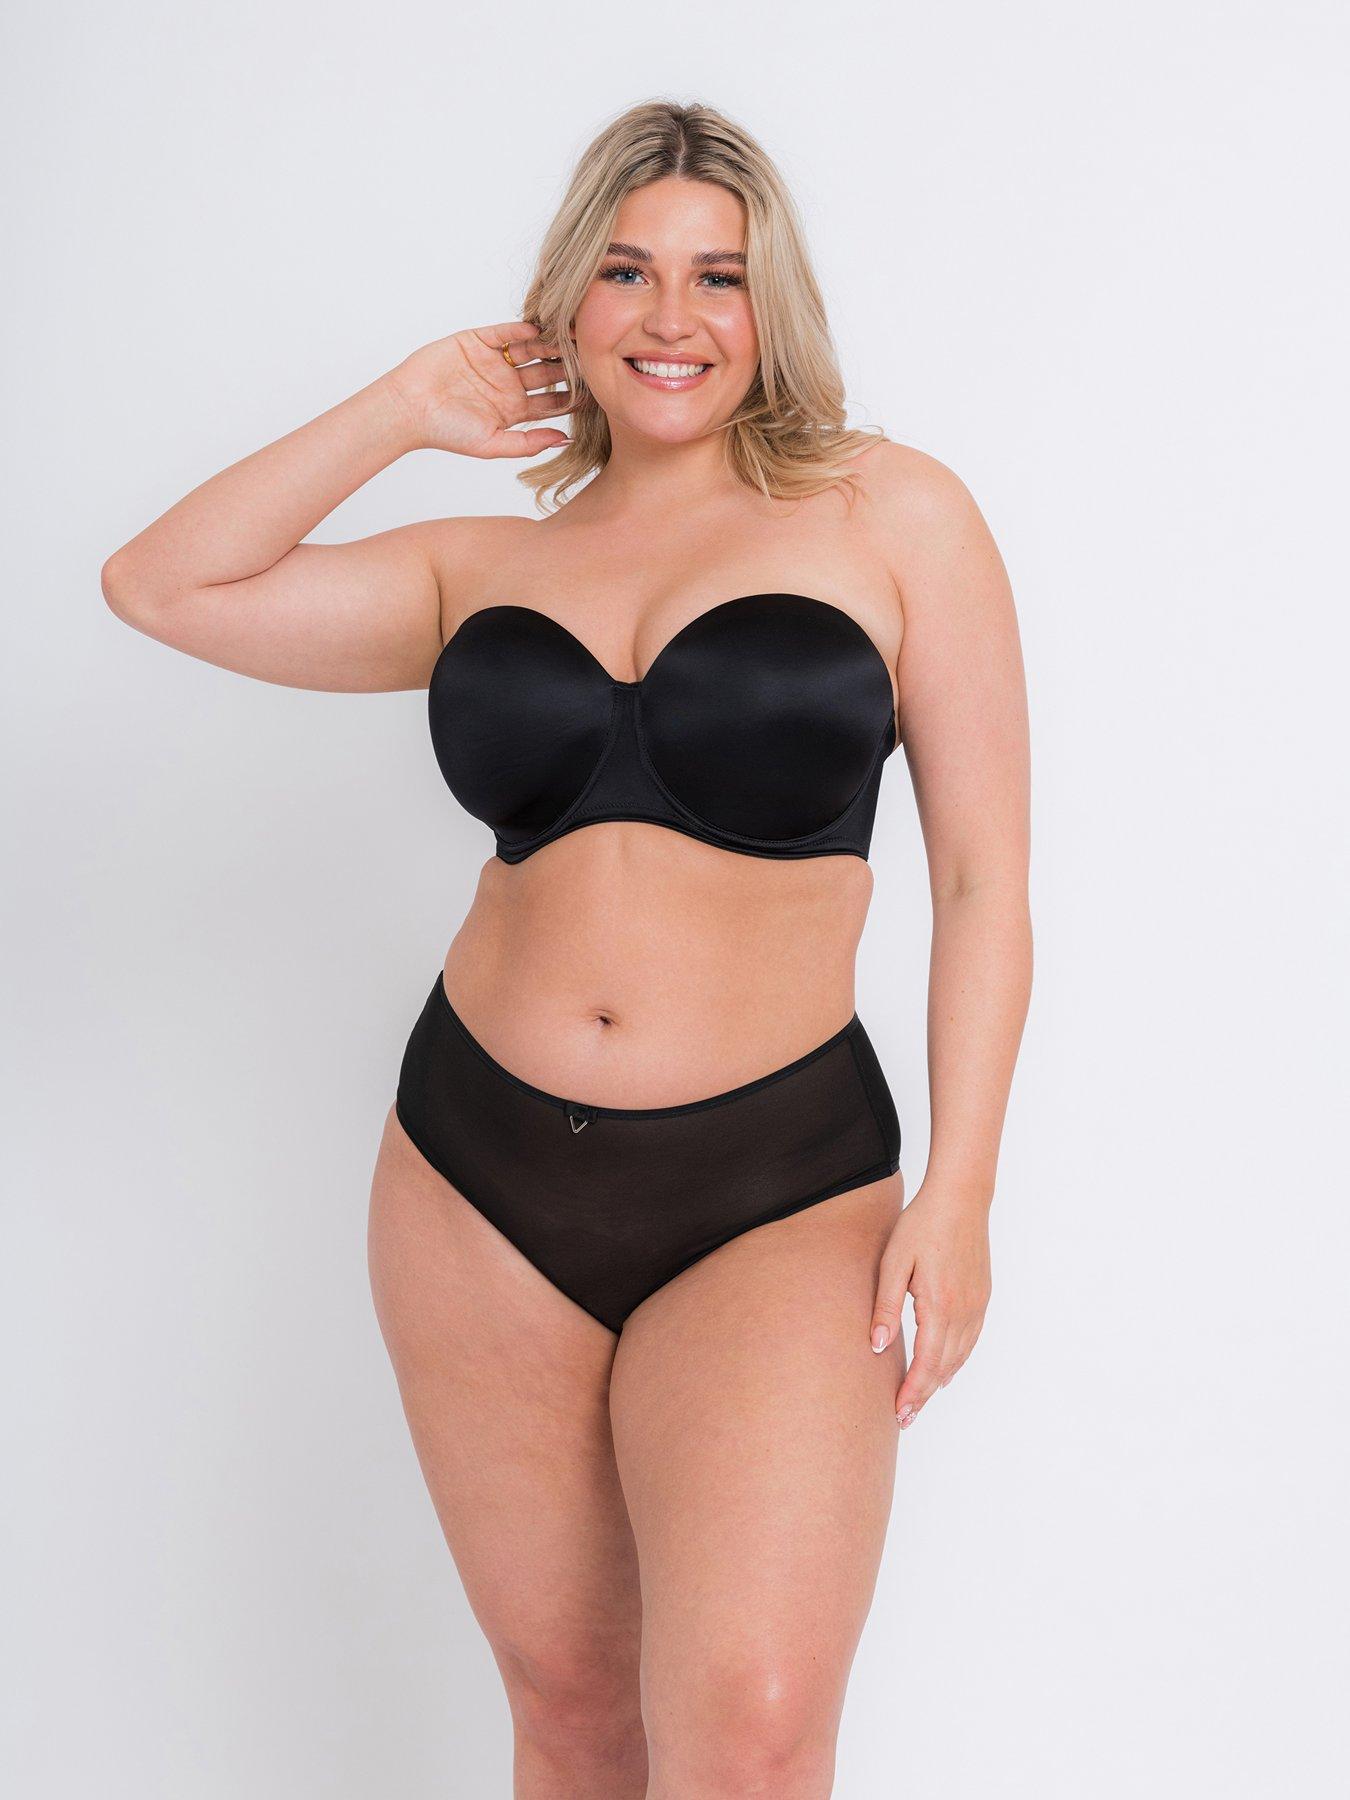 Curvy Kate - The perfect boob boost! Designed to lift your boobs and your  mood, this range guarantees maximum uplift and projection for a real wow  factor! The super flattering sweetheart neckline